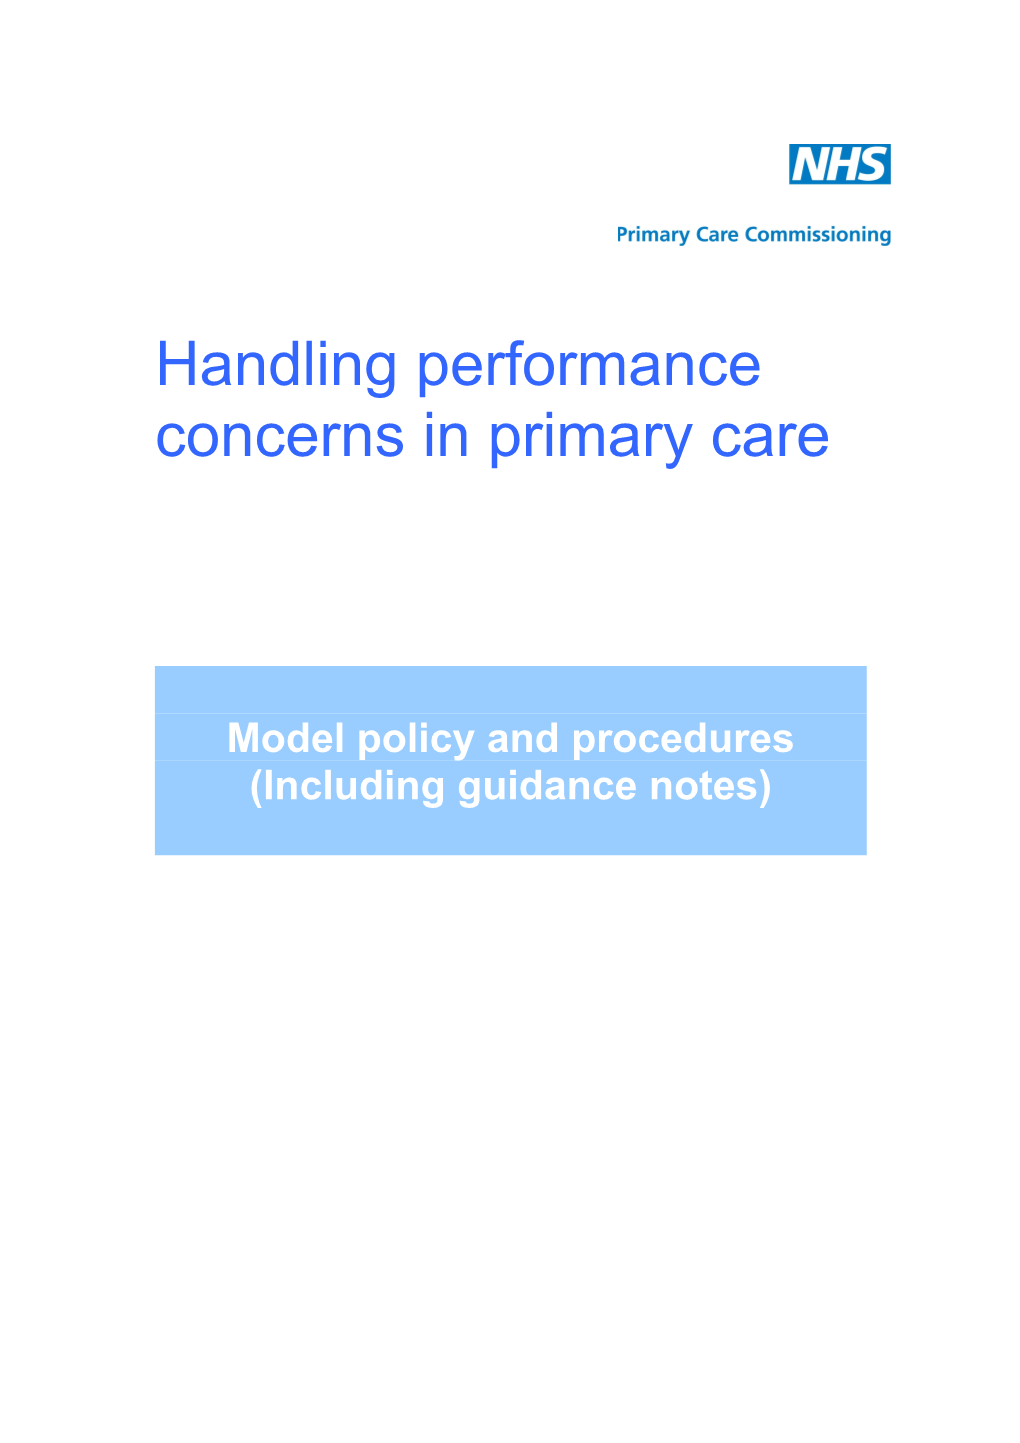 Handling Performance Concerns in Primary Care Model Policy 2